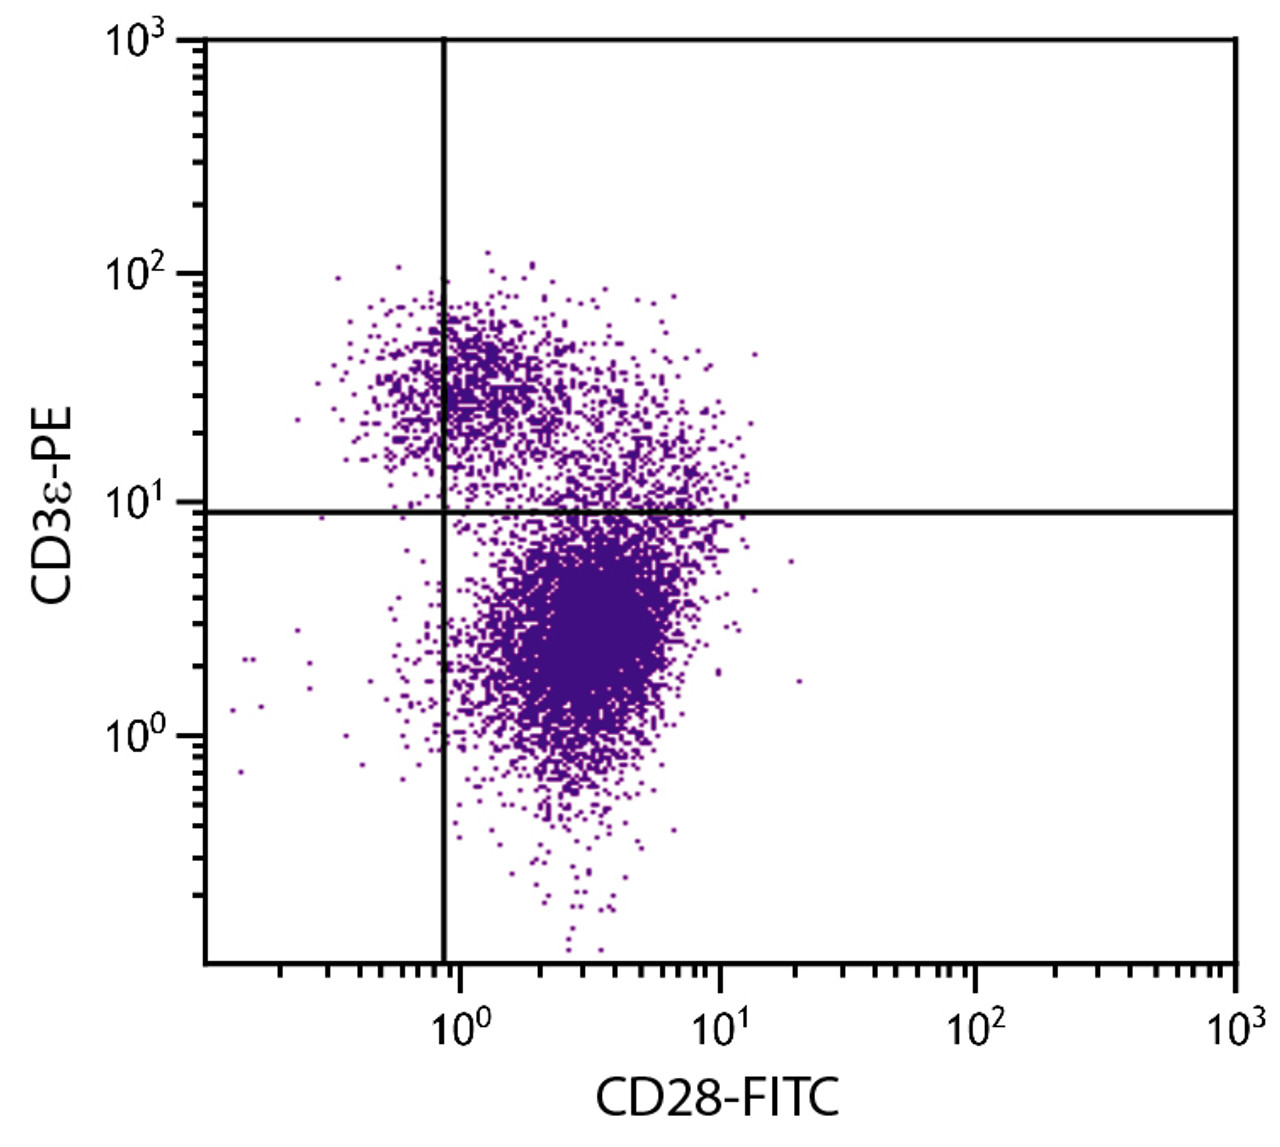 BALB/c mouse thymocytes were stained with Hamster Anti-Mouse CD28-FITC (Cat. No. 98-714) and Rat Anti-Mouse CD3?-PE .